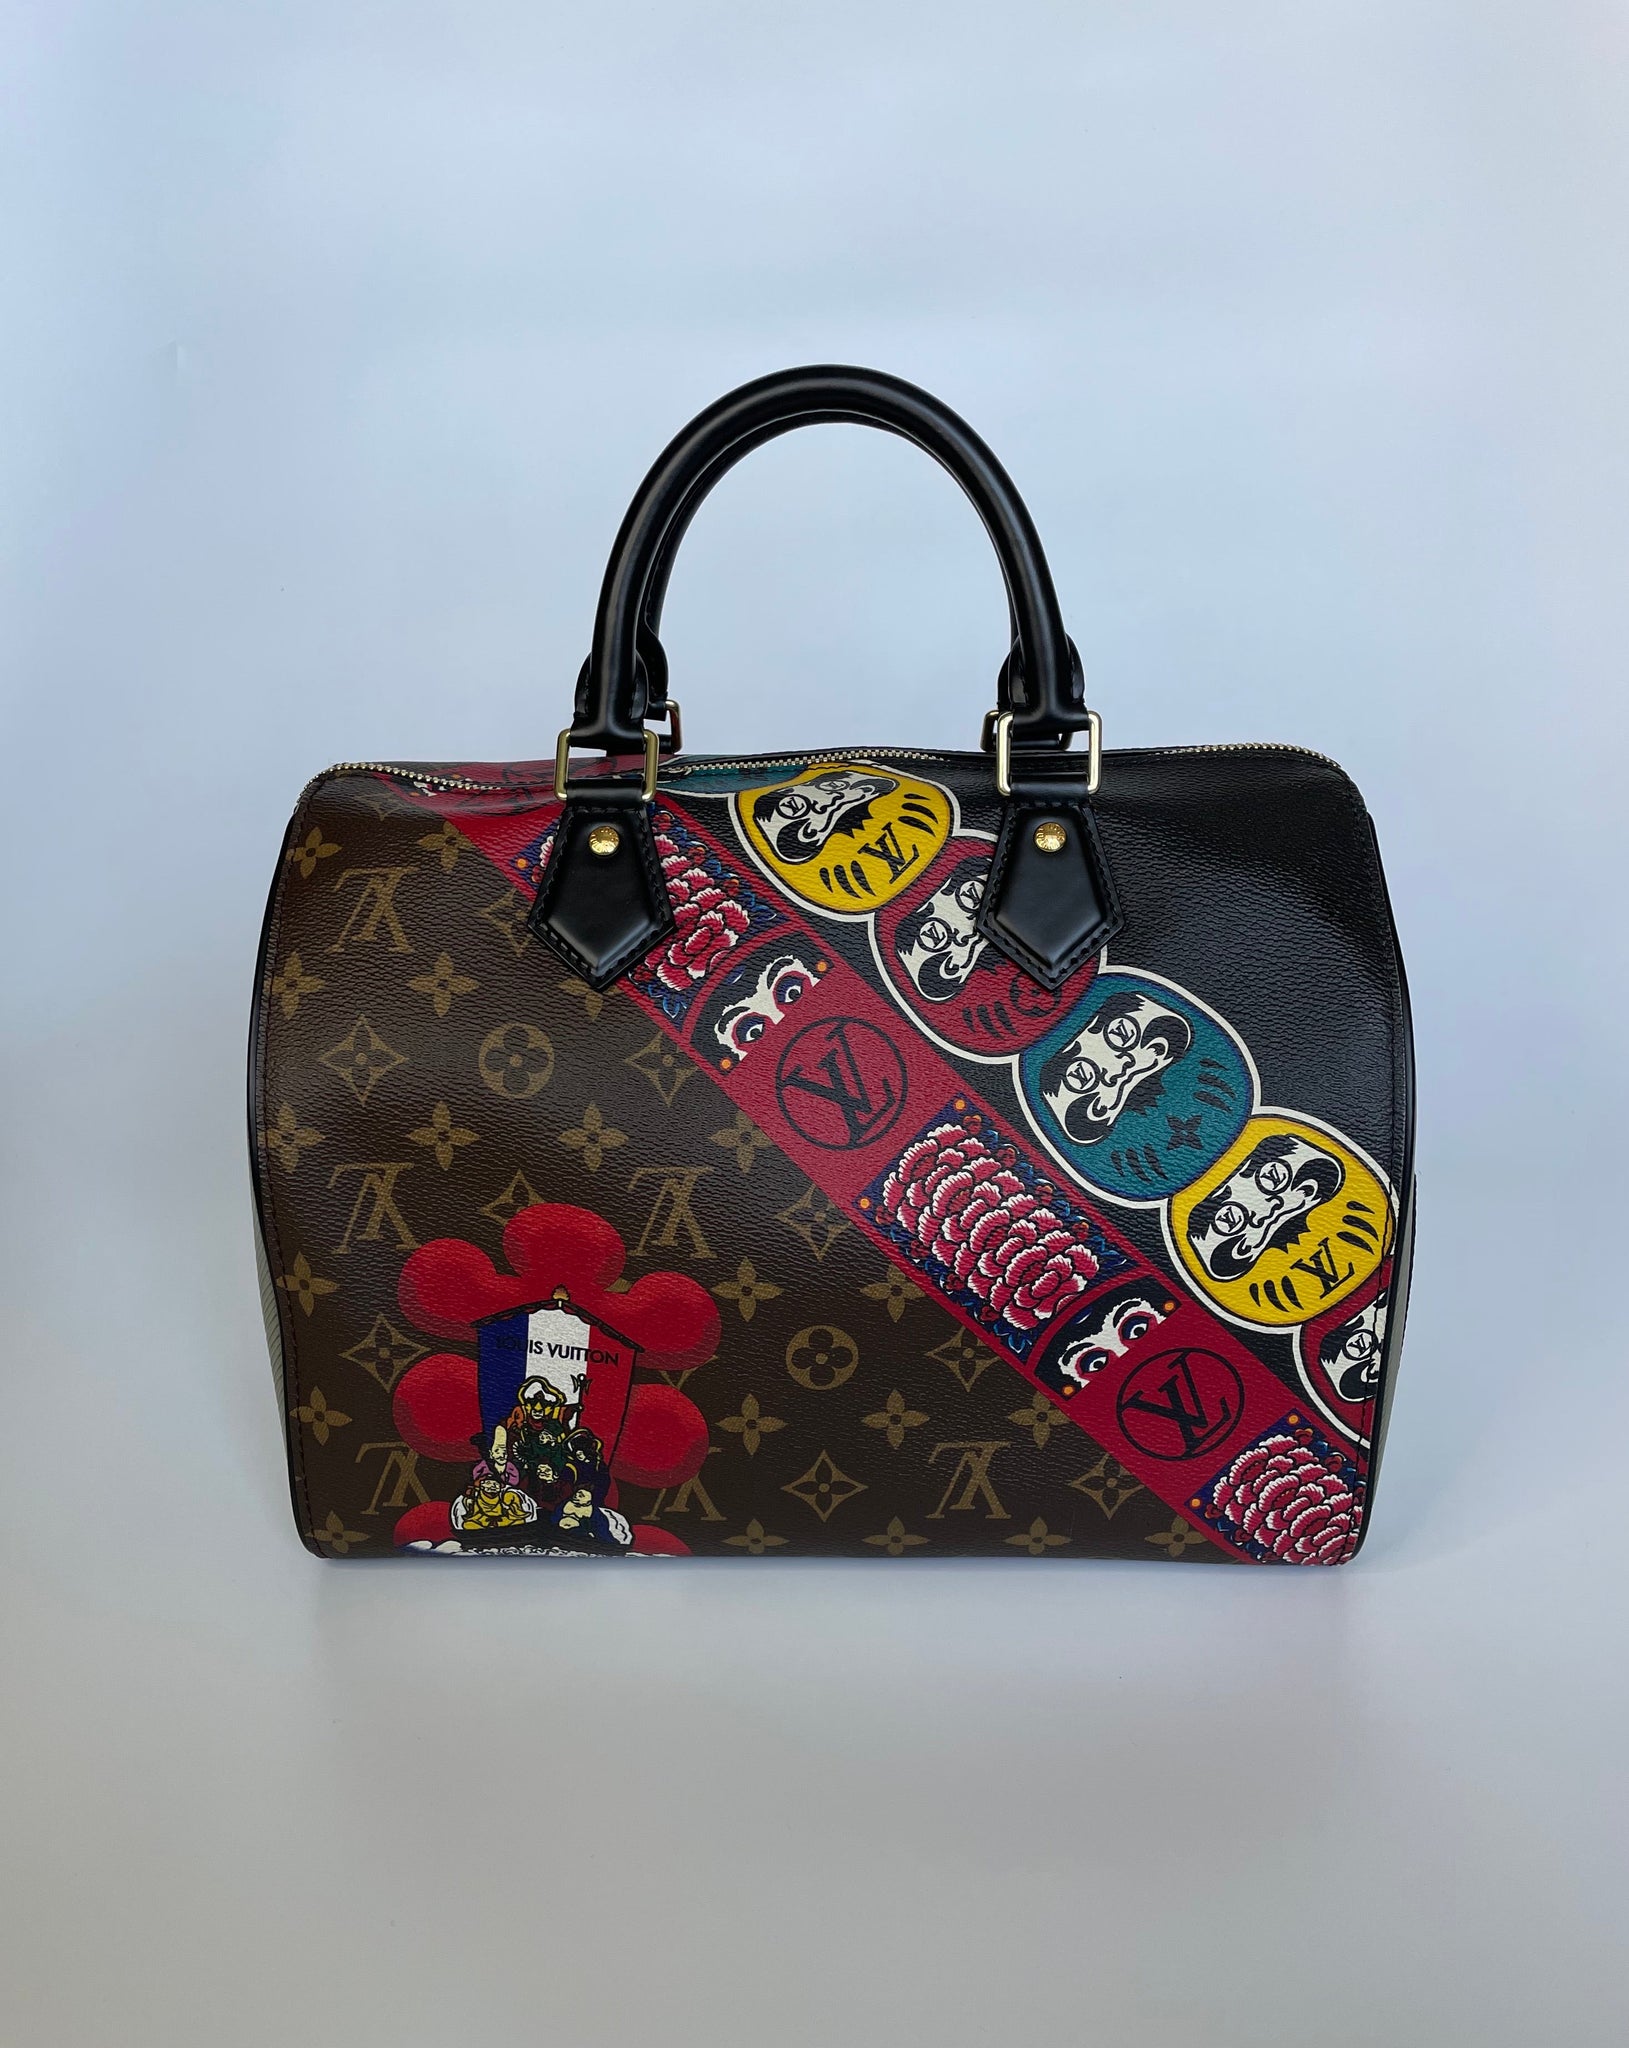 Louis Vuitton Limited Edition Speedy 30 Camouflage We all have our